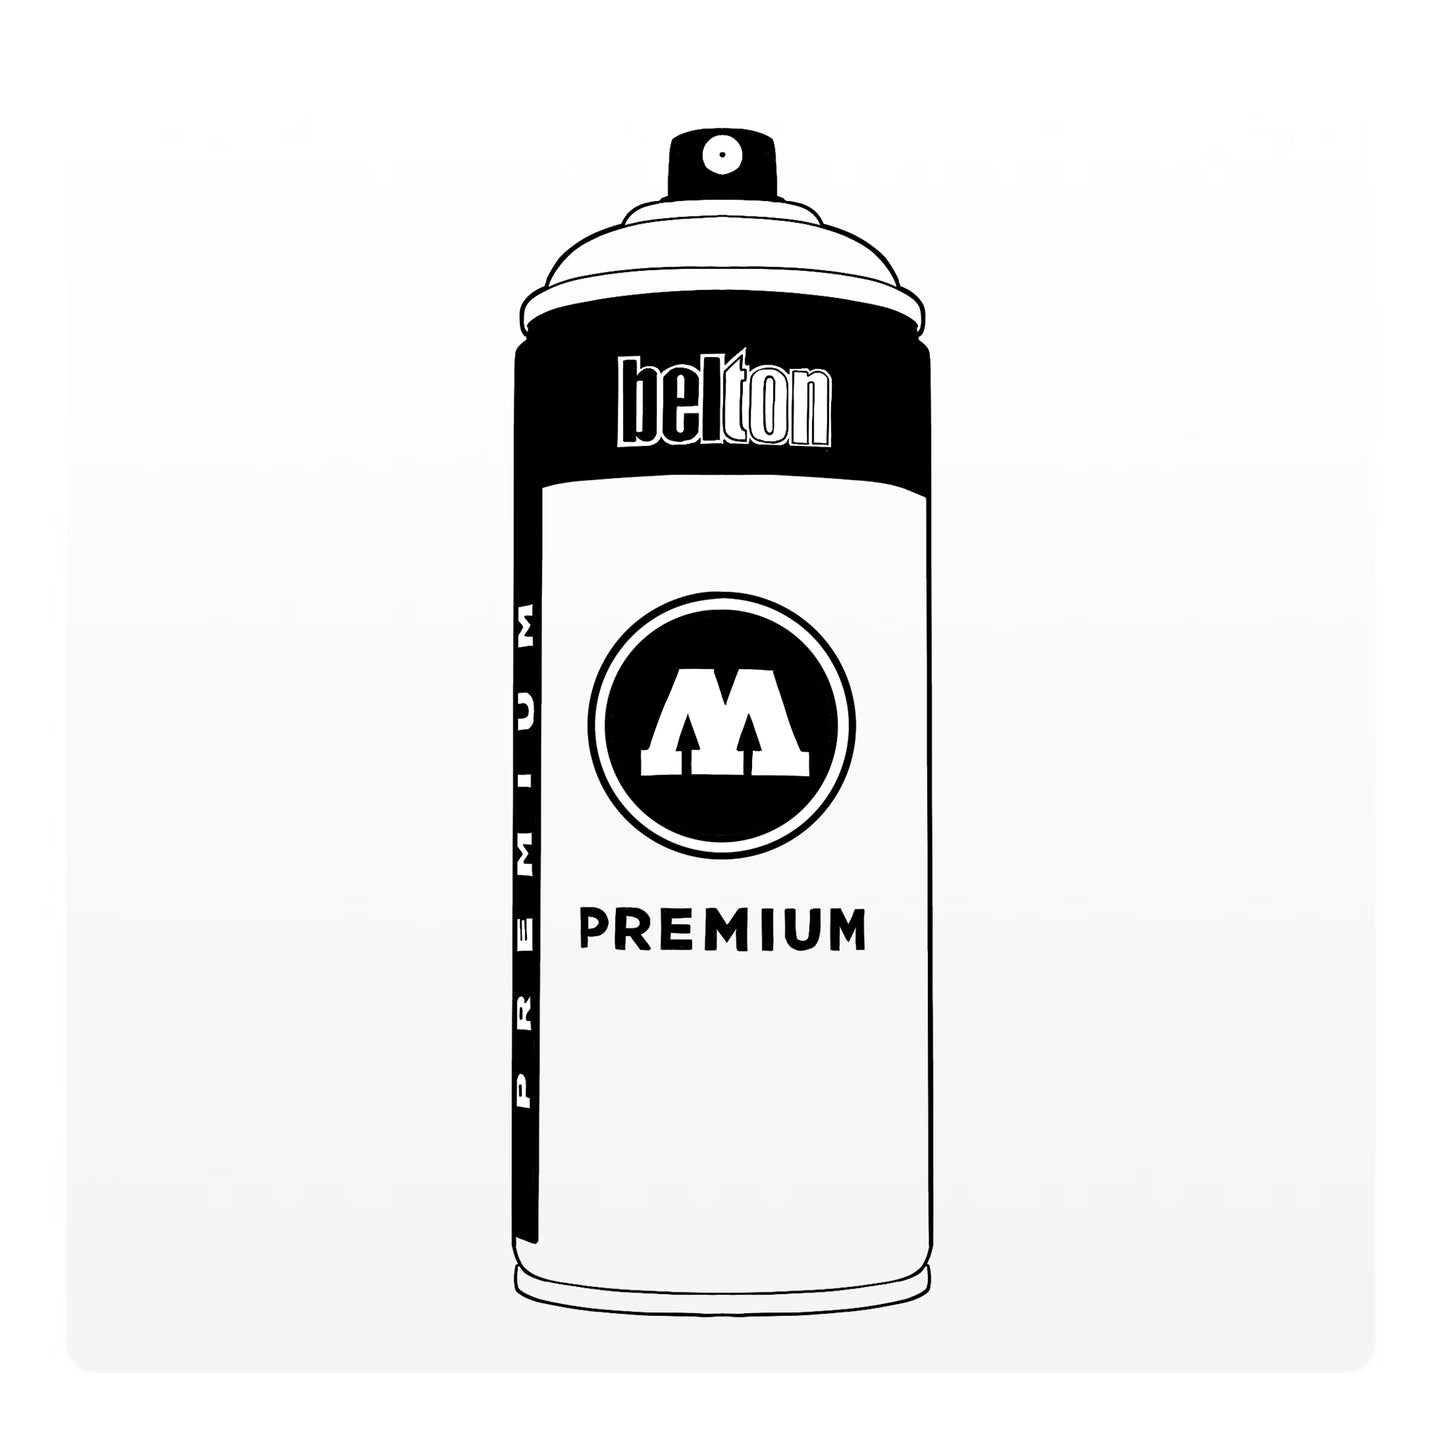 A line drawing of a spray paint can with a transparent, light grey color swatch.